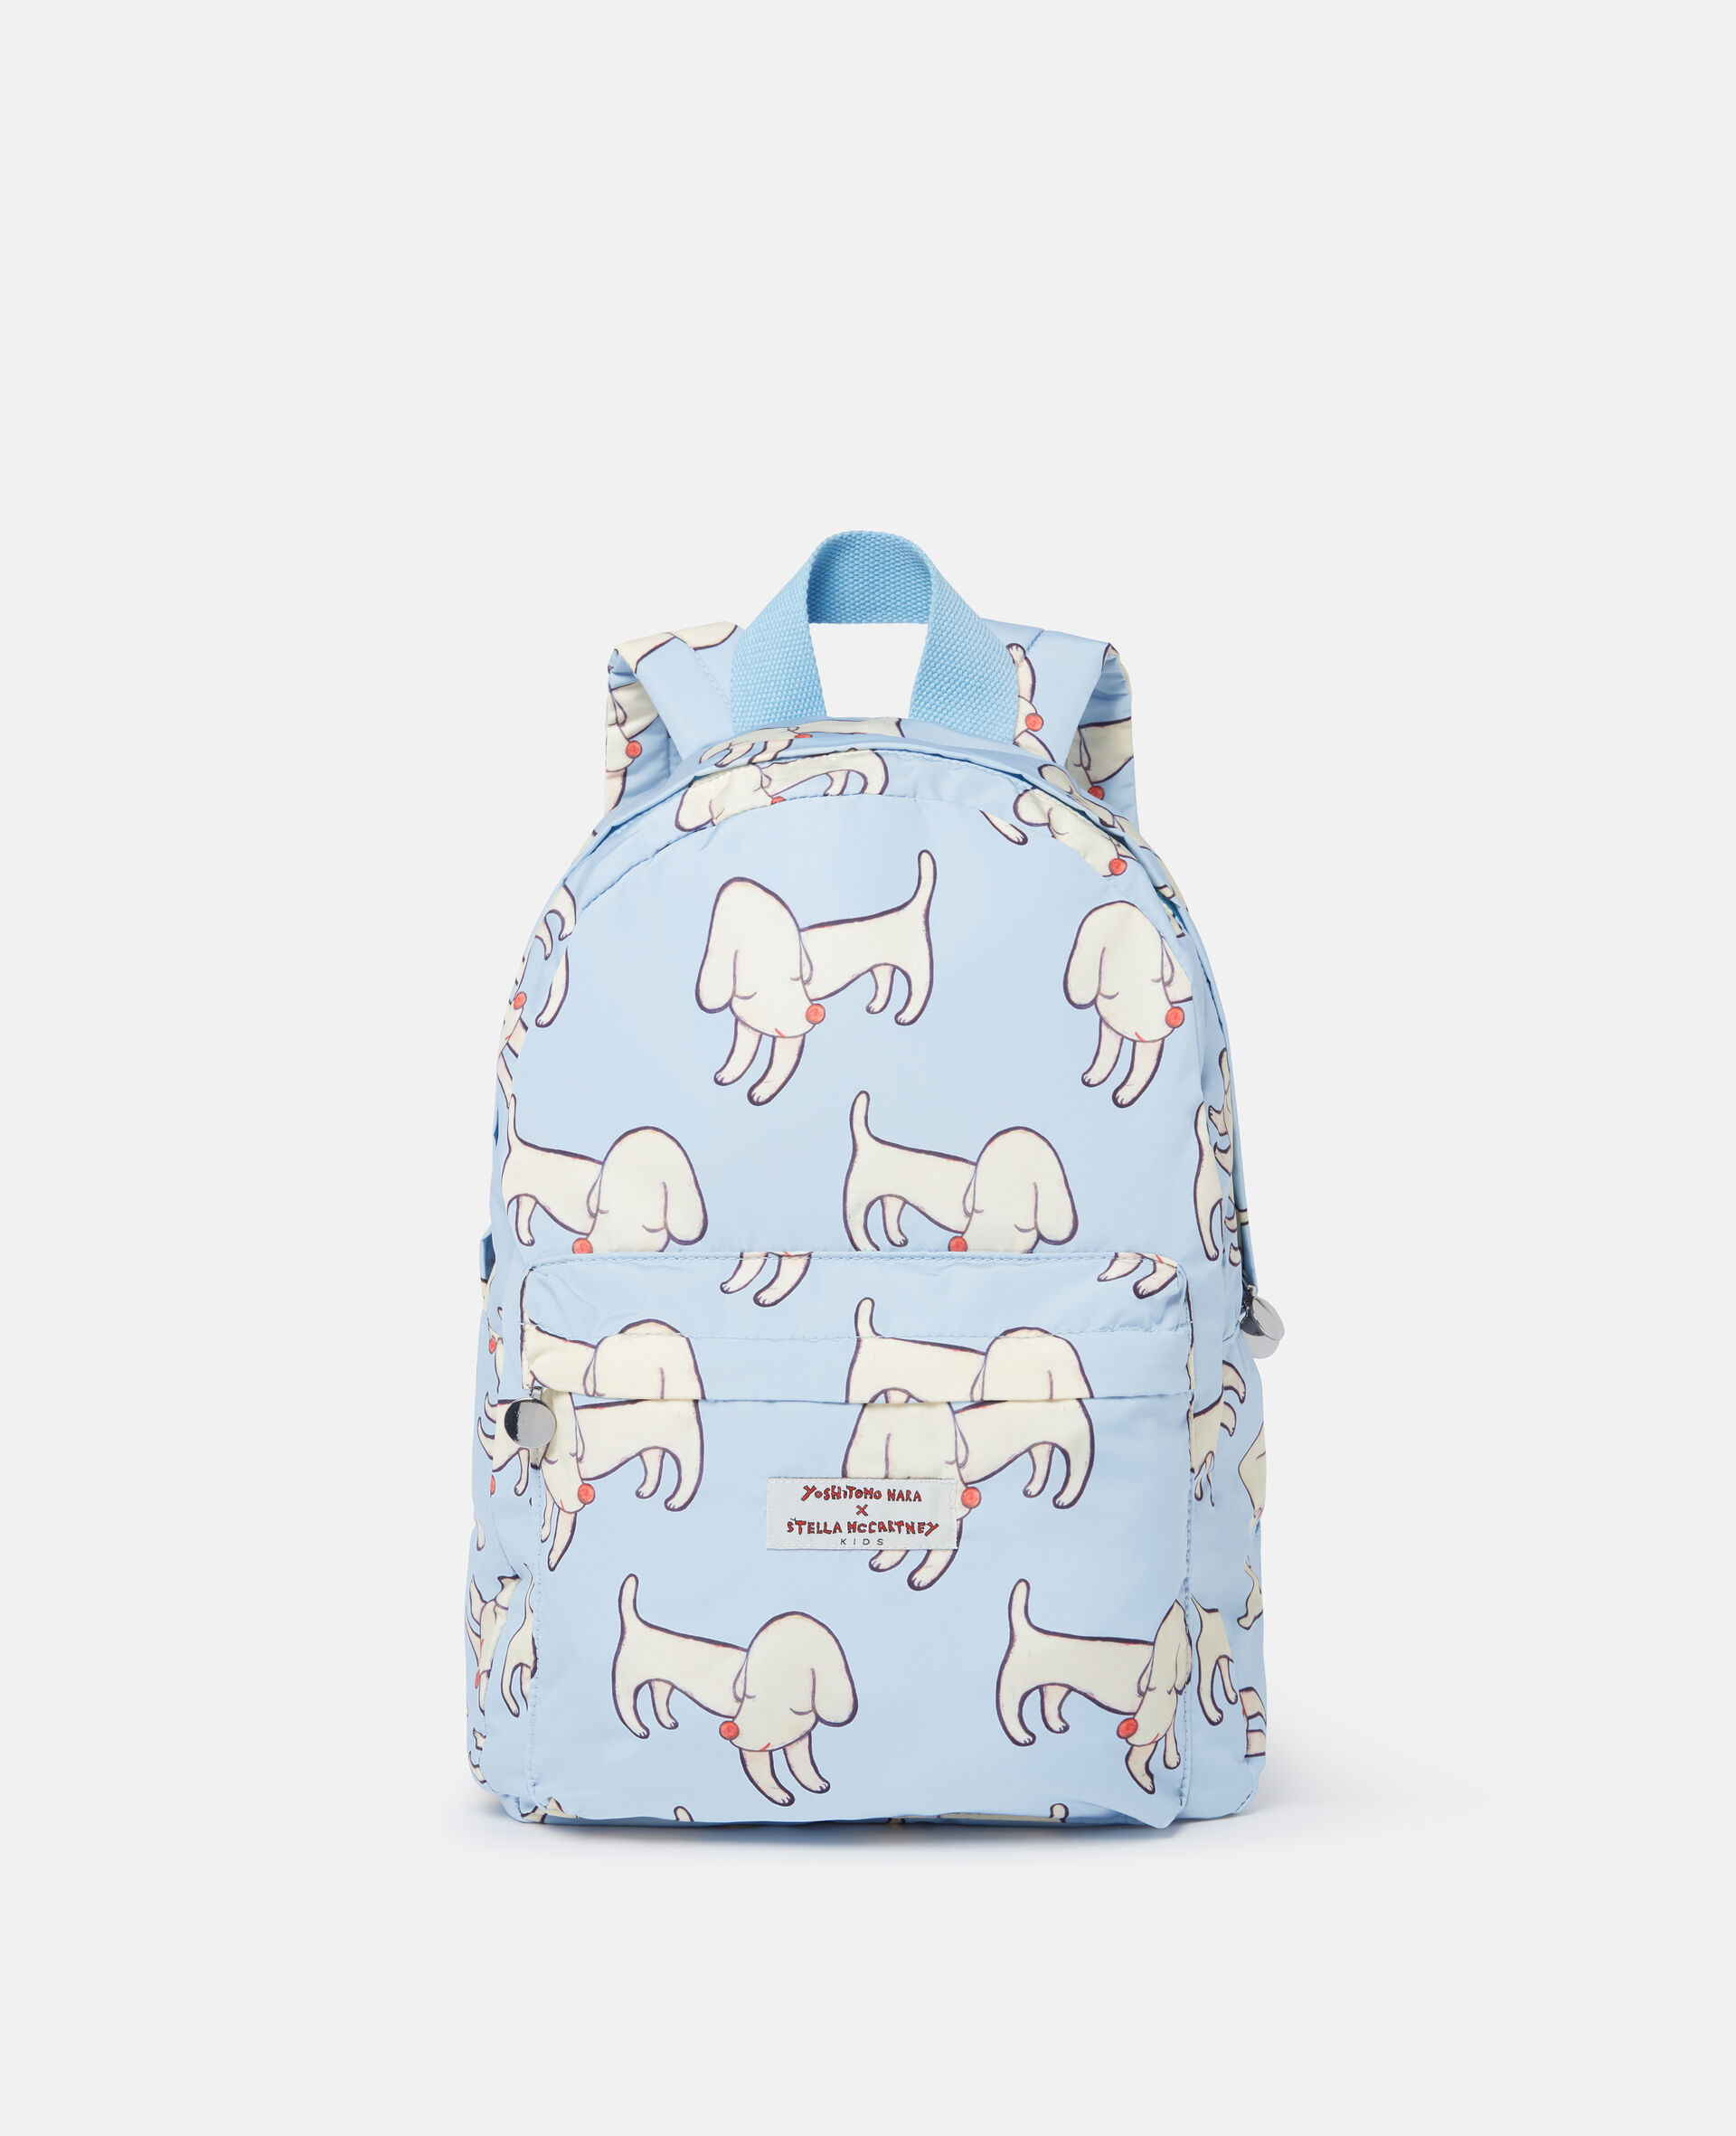 Lonesome Puppy Print Backpack-Multicolour-large image number 0